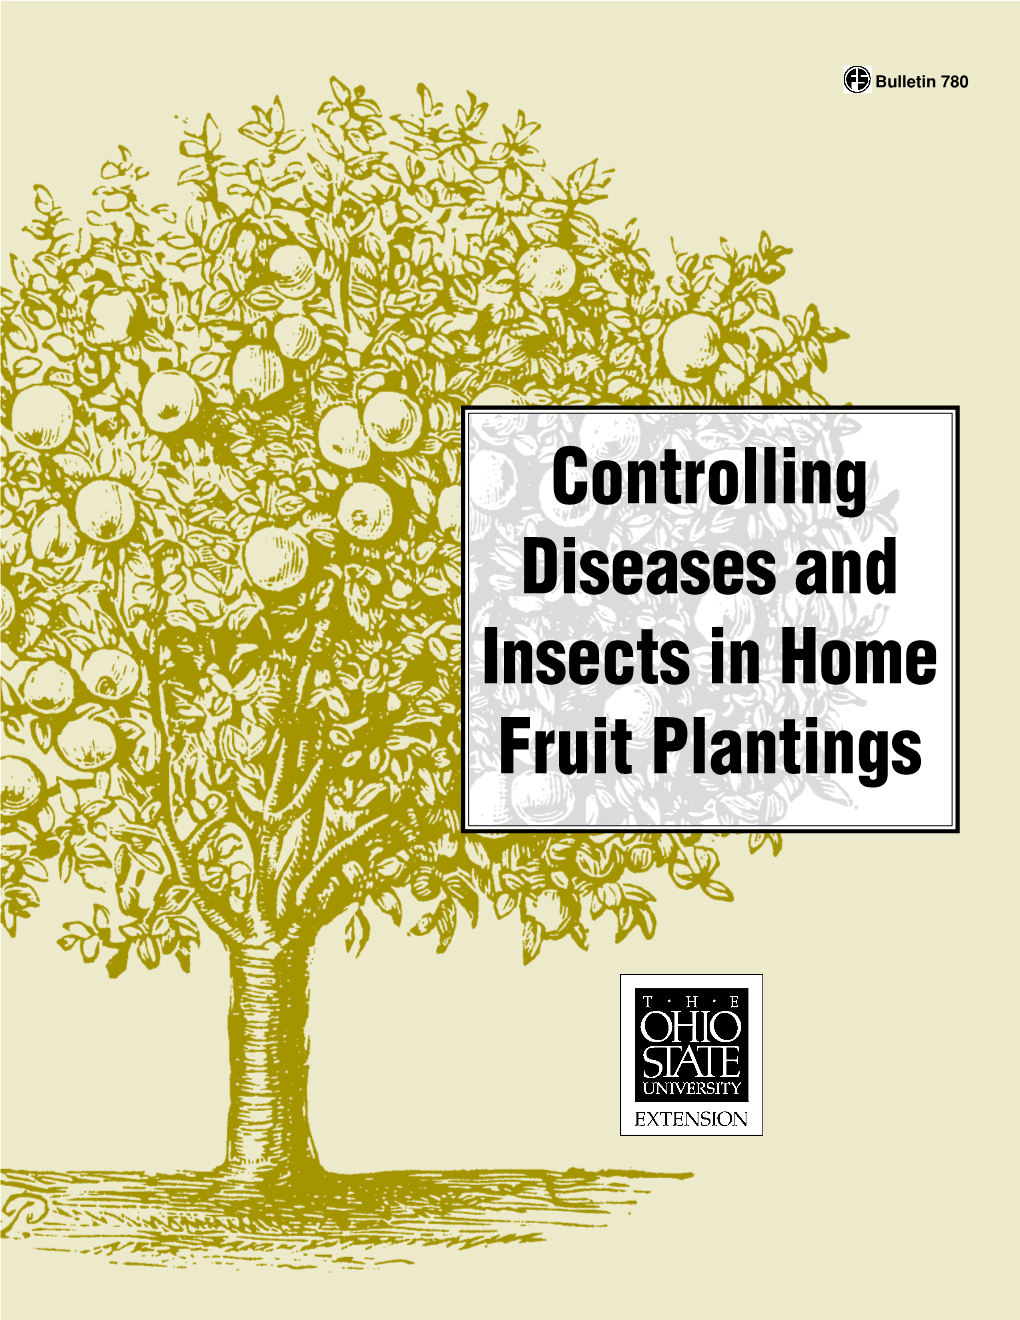 Controlling Diseases and Insects in Home Fruit Plantings SMALL FRUIT DEVELOPMENTAL STAGES GRAPE STRAWBERRY RASPBERRY